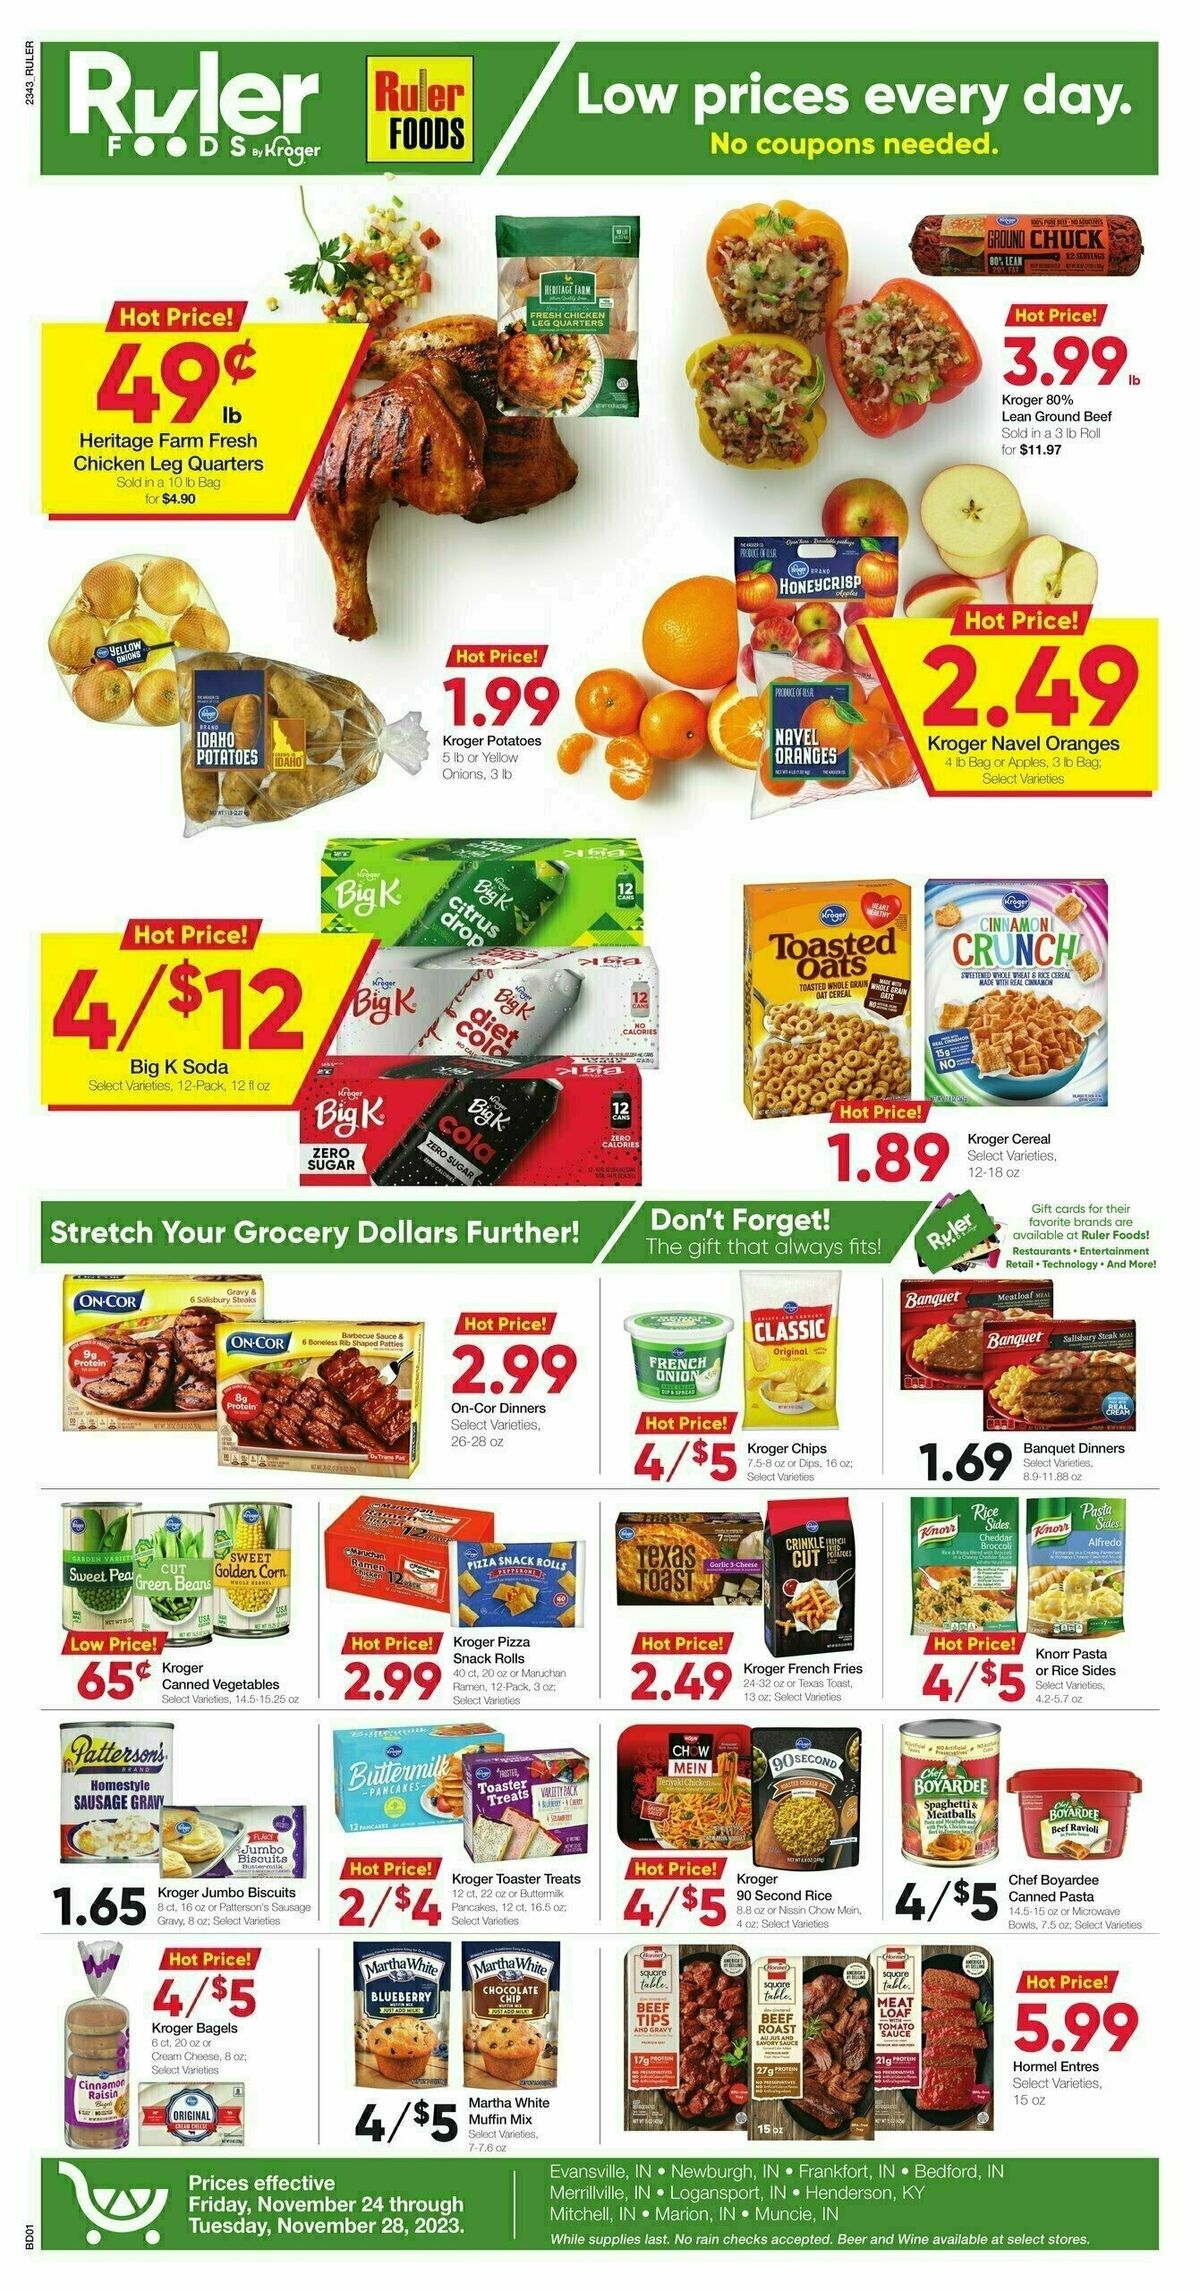 Ruler Foods Best Offers And Special Buys From November 24